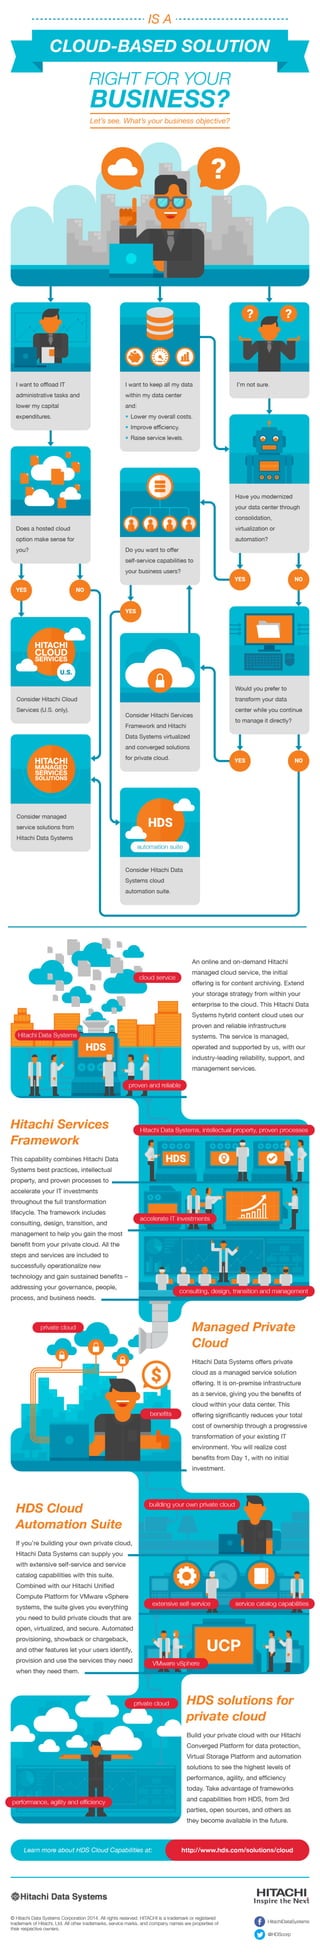 HDS Cloud Solutions Infographic 